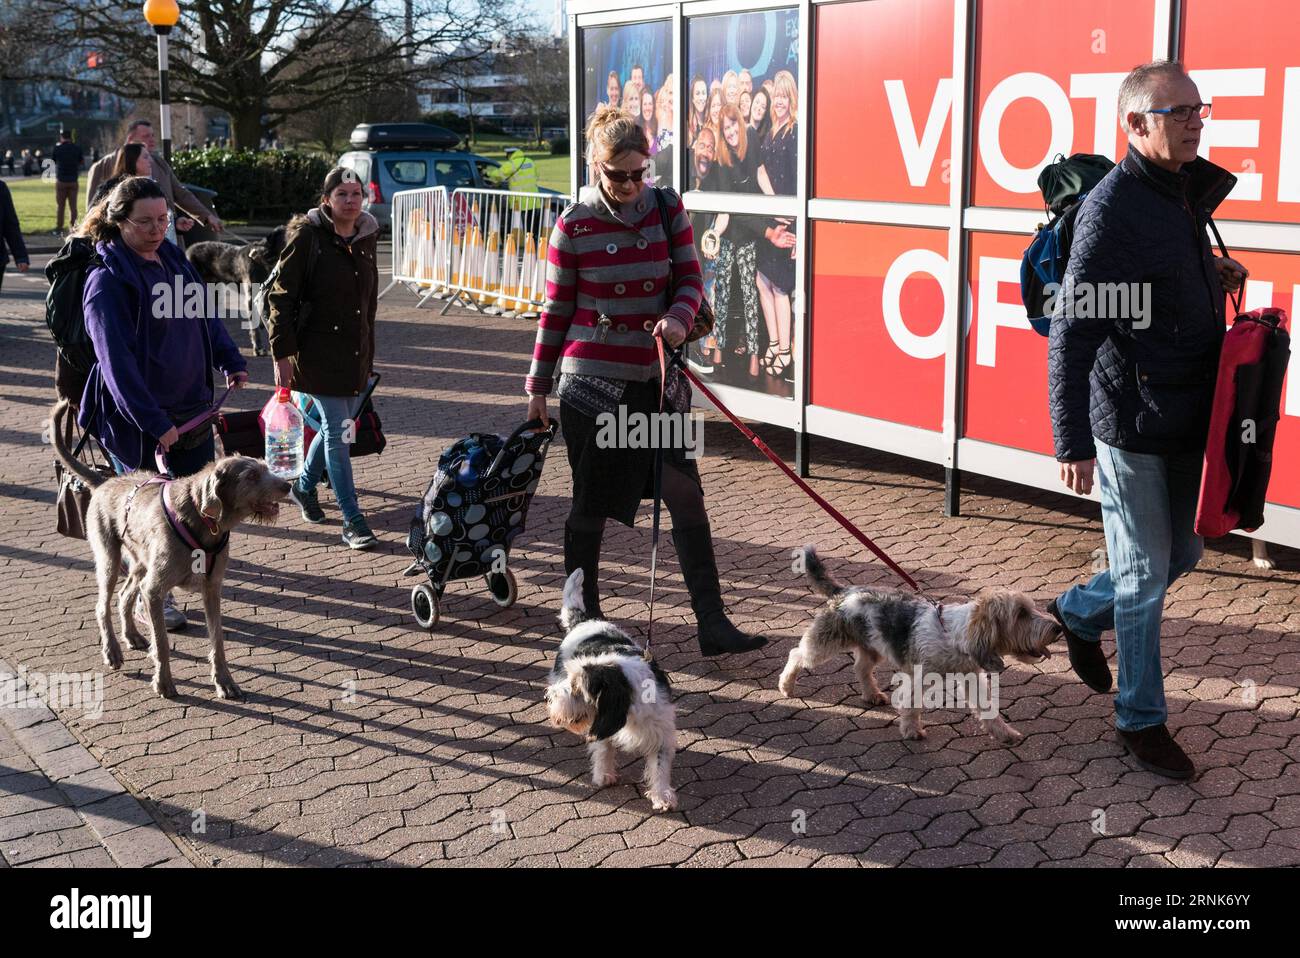 (170309) -- BIRMINGHAM (BRITAIN), March 9, 2017 -- Dog owners and their dogs arrive for the annual Crufts dog show in Birmingham, Britain, on March 9, 2017. ) BRITAIN-BIRMINGHAM-CRUFTS DOG SHOW RayxTang PUBLICATIONxNOTxINxCHN   Birmingham Britain March 9 2017 Dog Owners and their Dogs Arrive for The Annual Crufts Dog Show in Birmingham Britain ON March 9 2017 Britain Birmingham Crufts Dog Show RayxTang PUBLICATIONxNOTxINxCHN Stock Photo